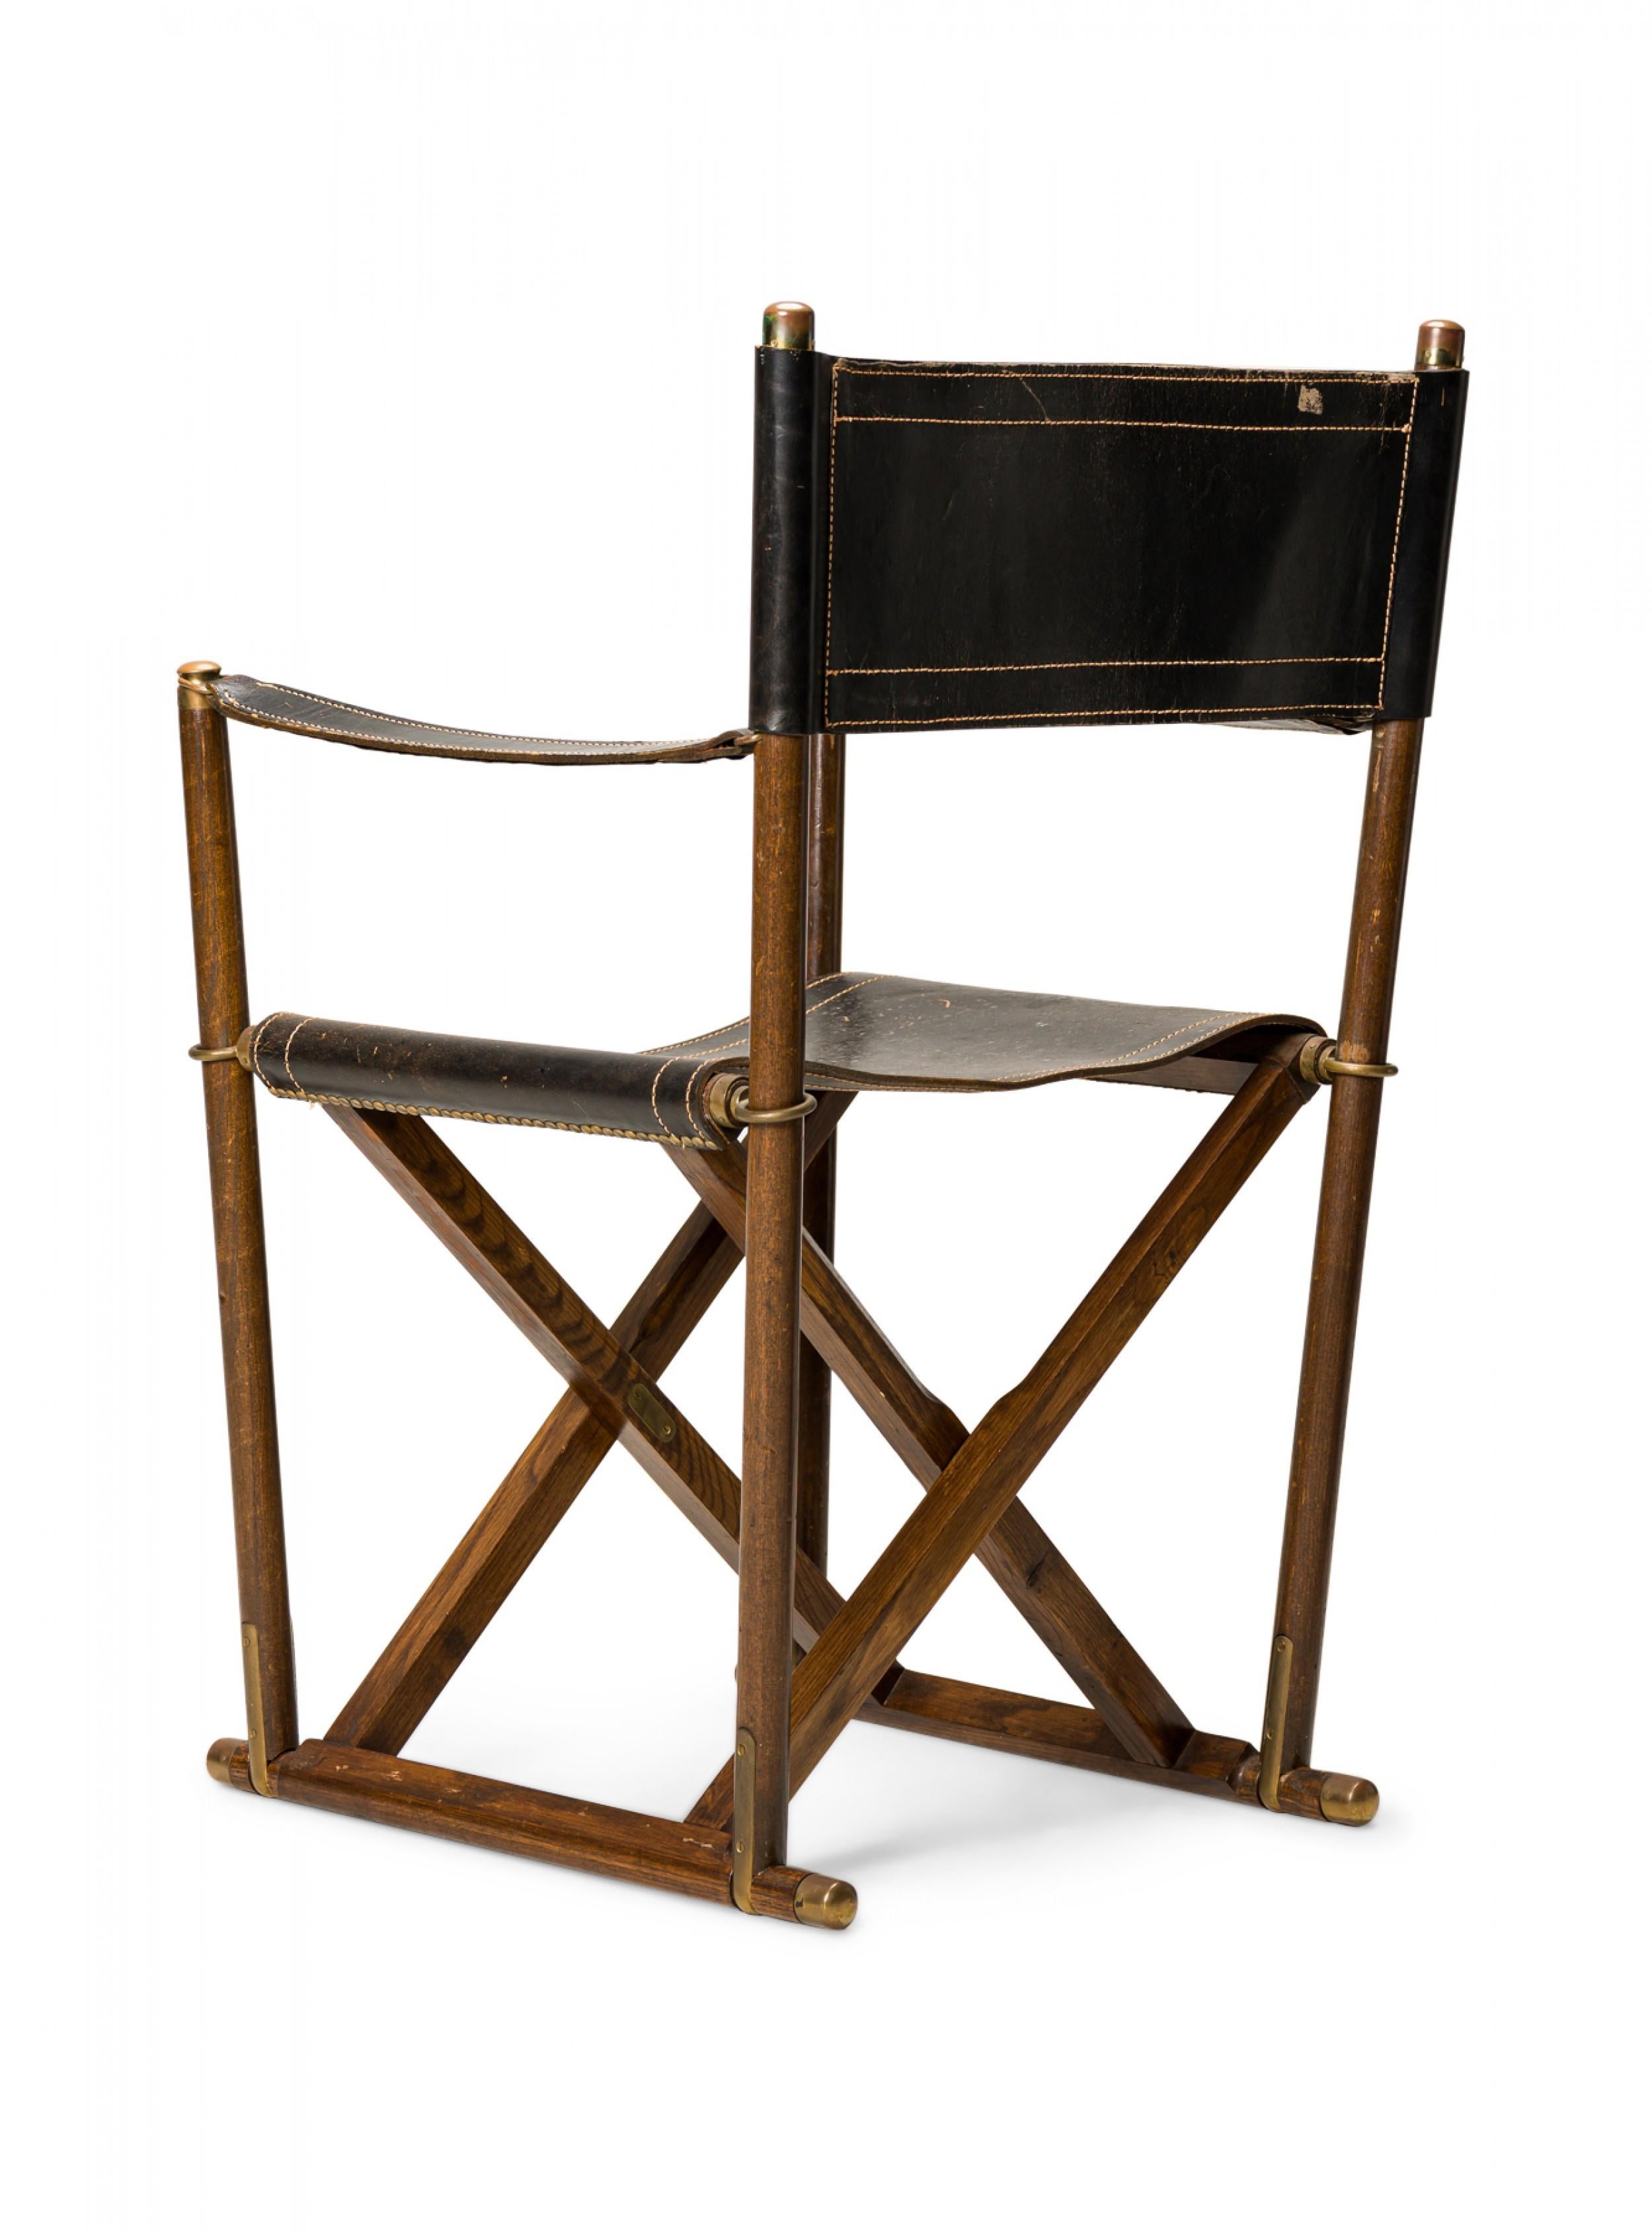 American Mid-Century folding campaign / director's chair with walnut frames and black stitched leather sling back, seat, and arm. (SARREID